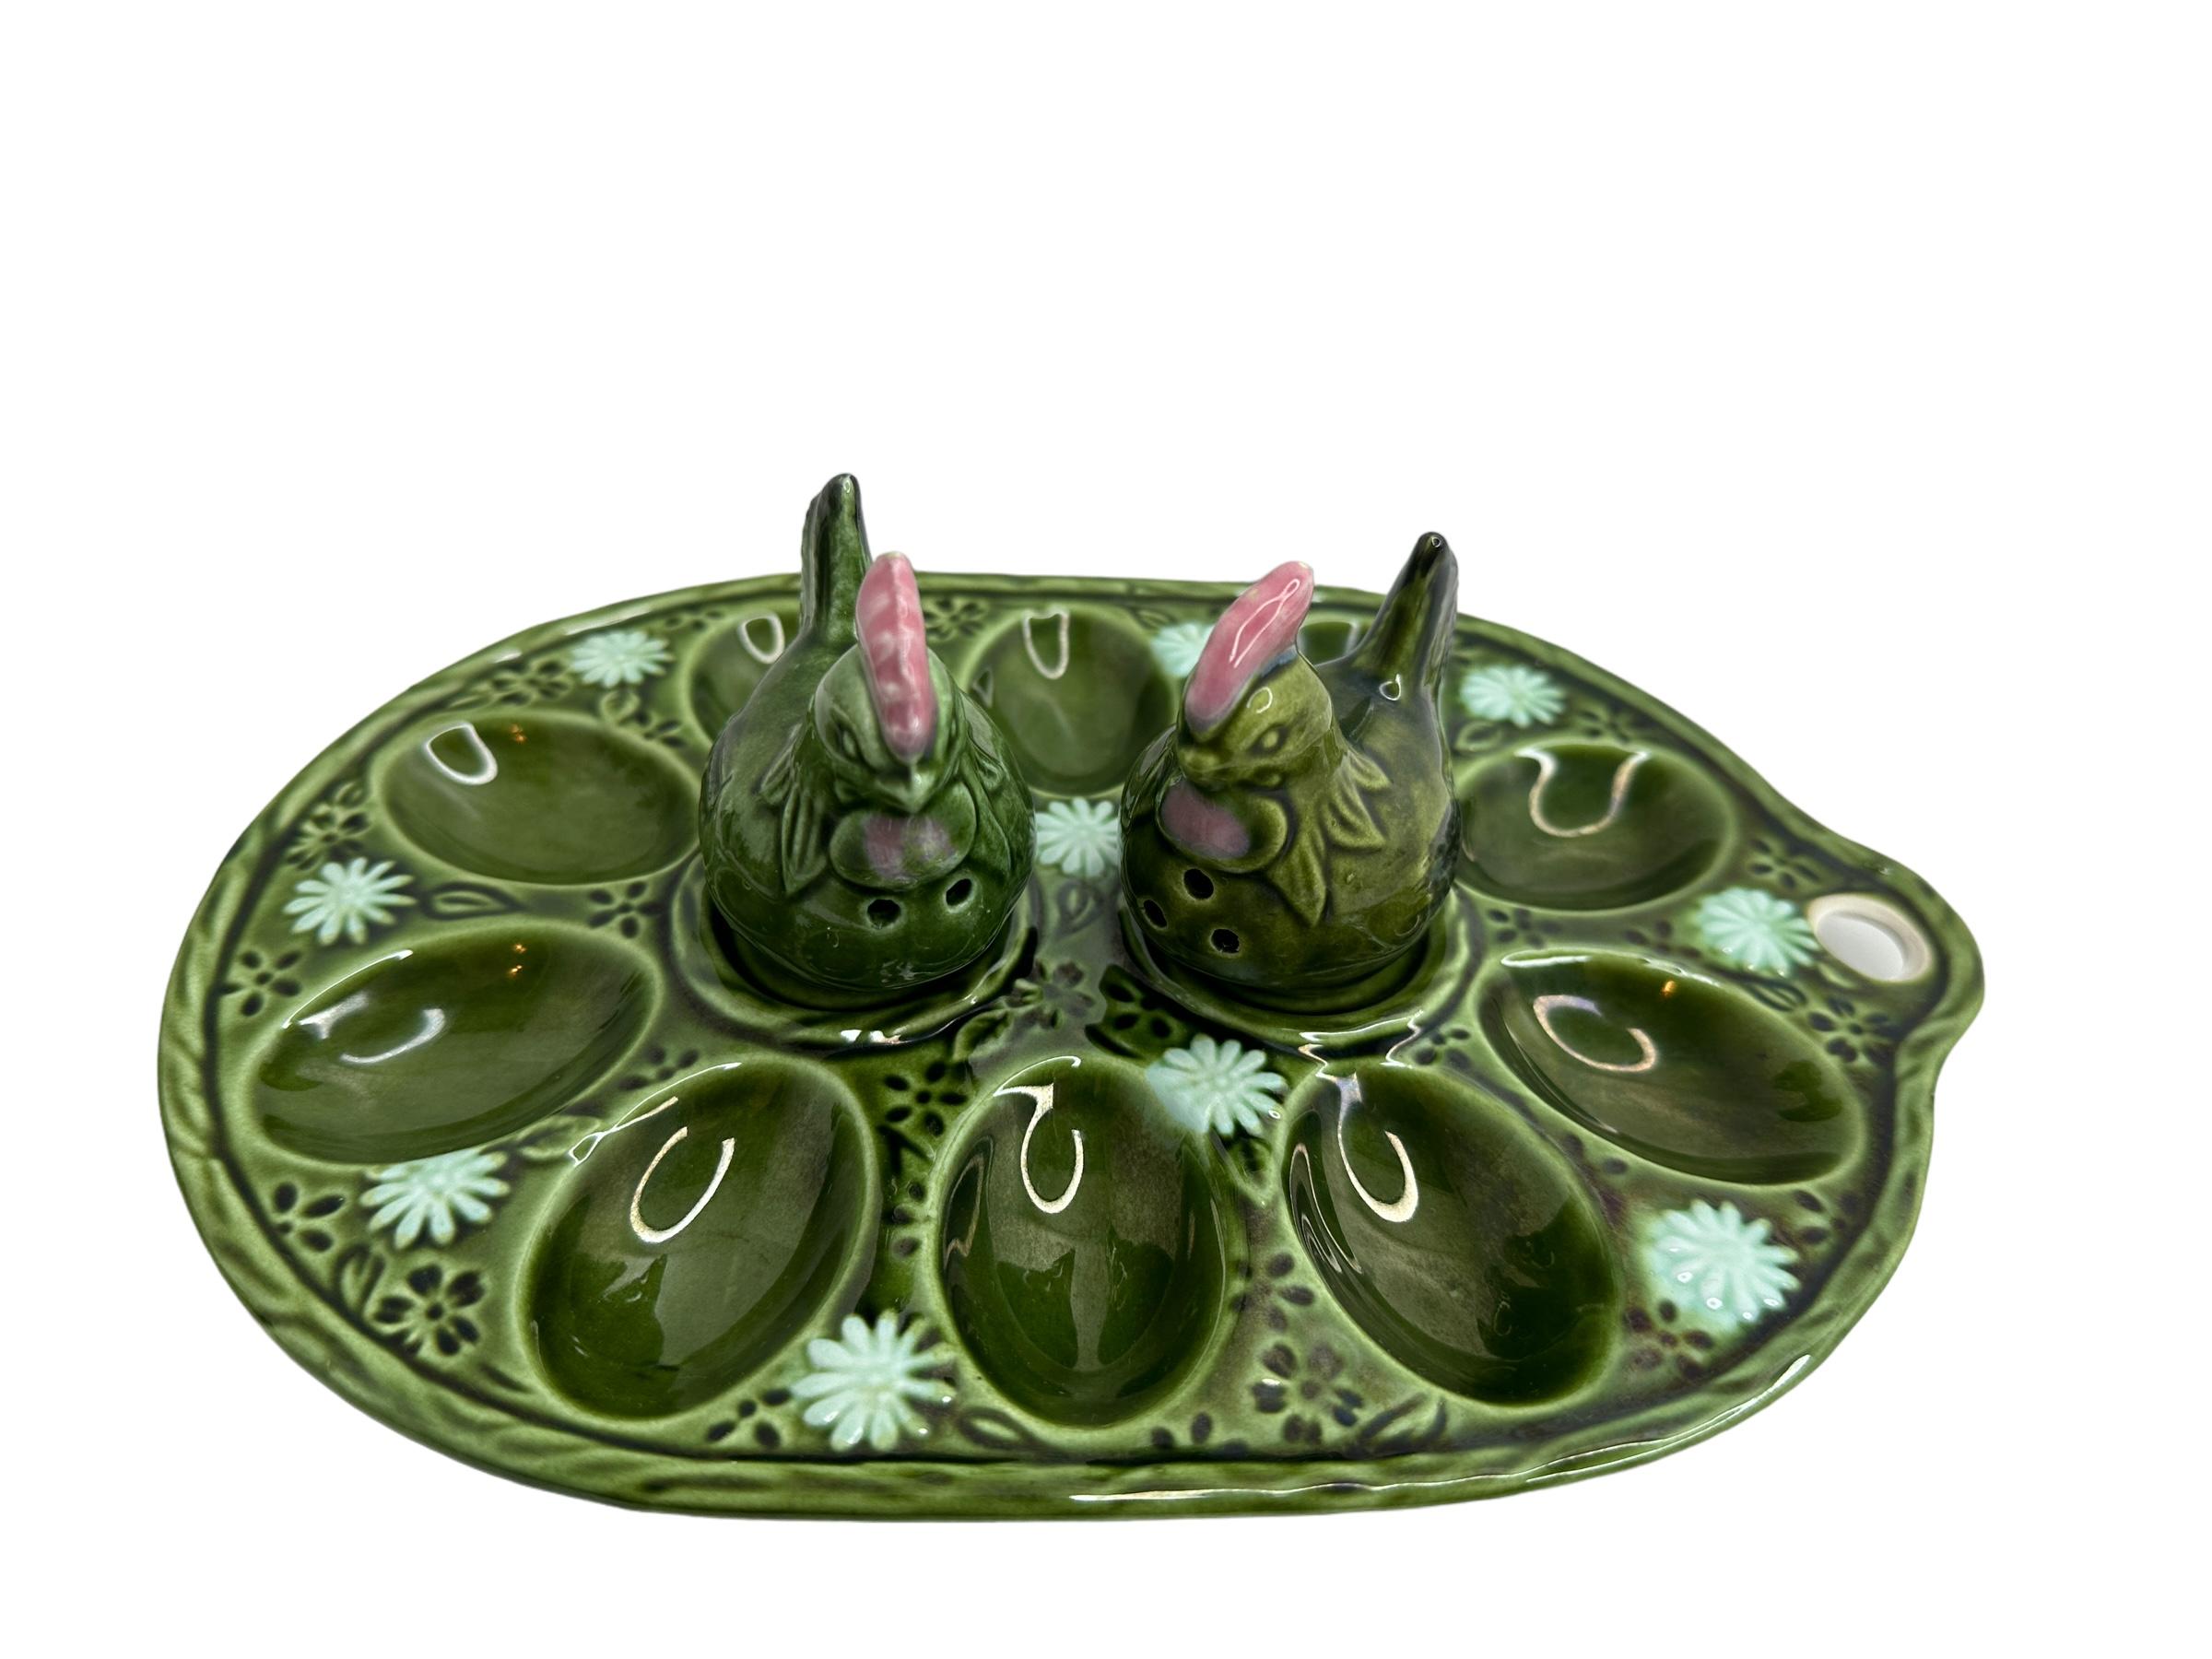 20th century German majolica plate platter for serving eggs with two chicken as salt and pepper shakers. Nice addition to your table or just to display. Please see detailed pictures for very good as found condition. Majolica is a type of earthenware